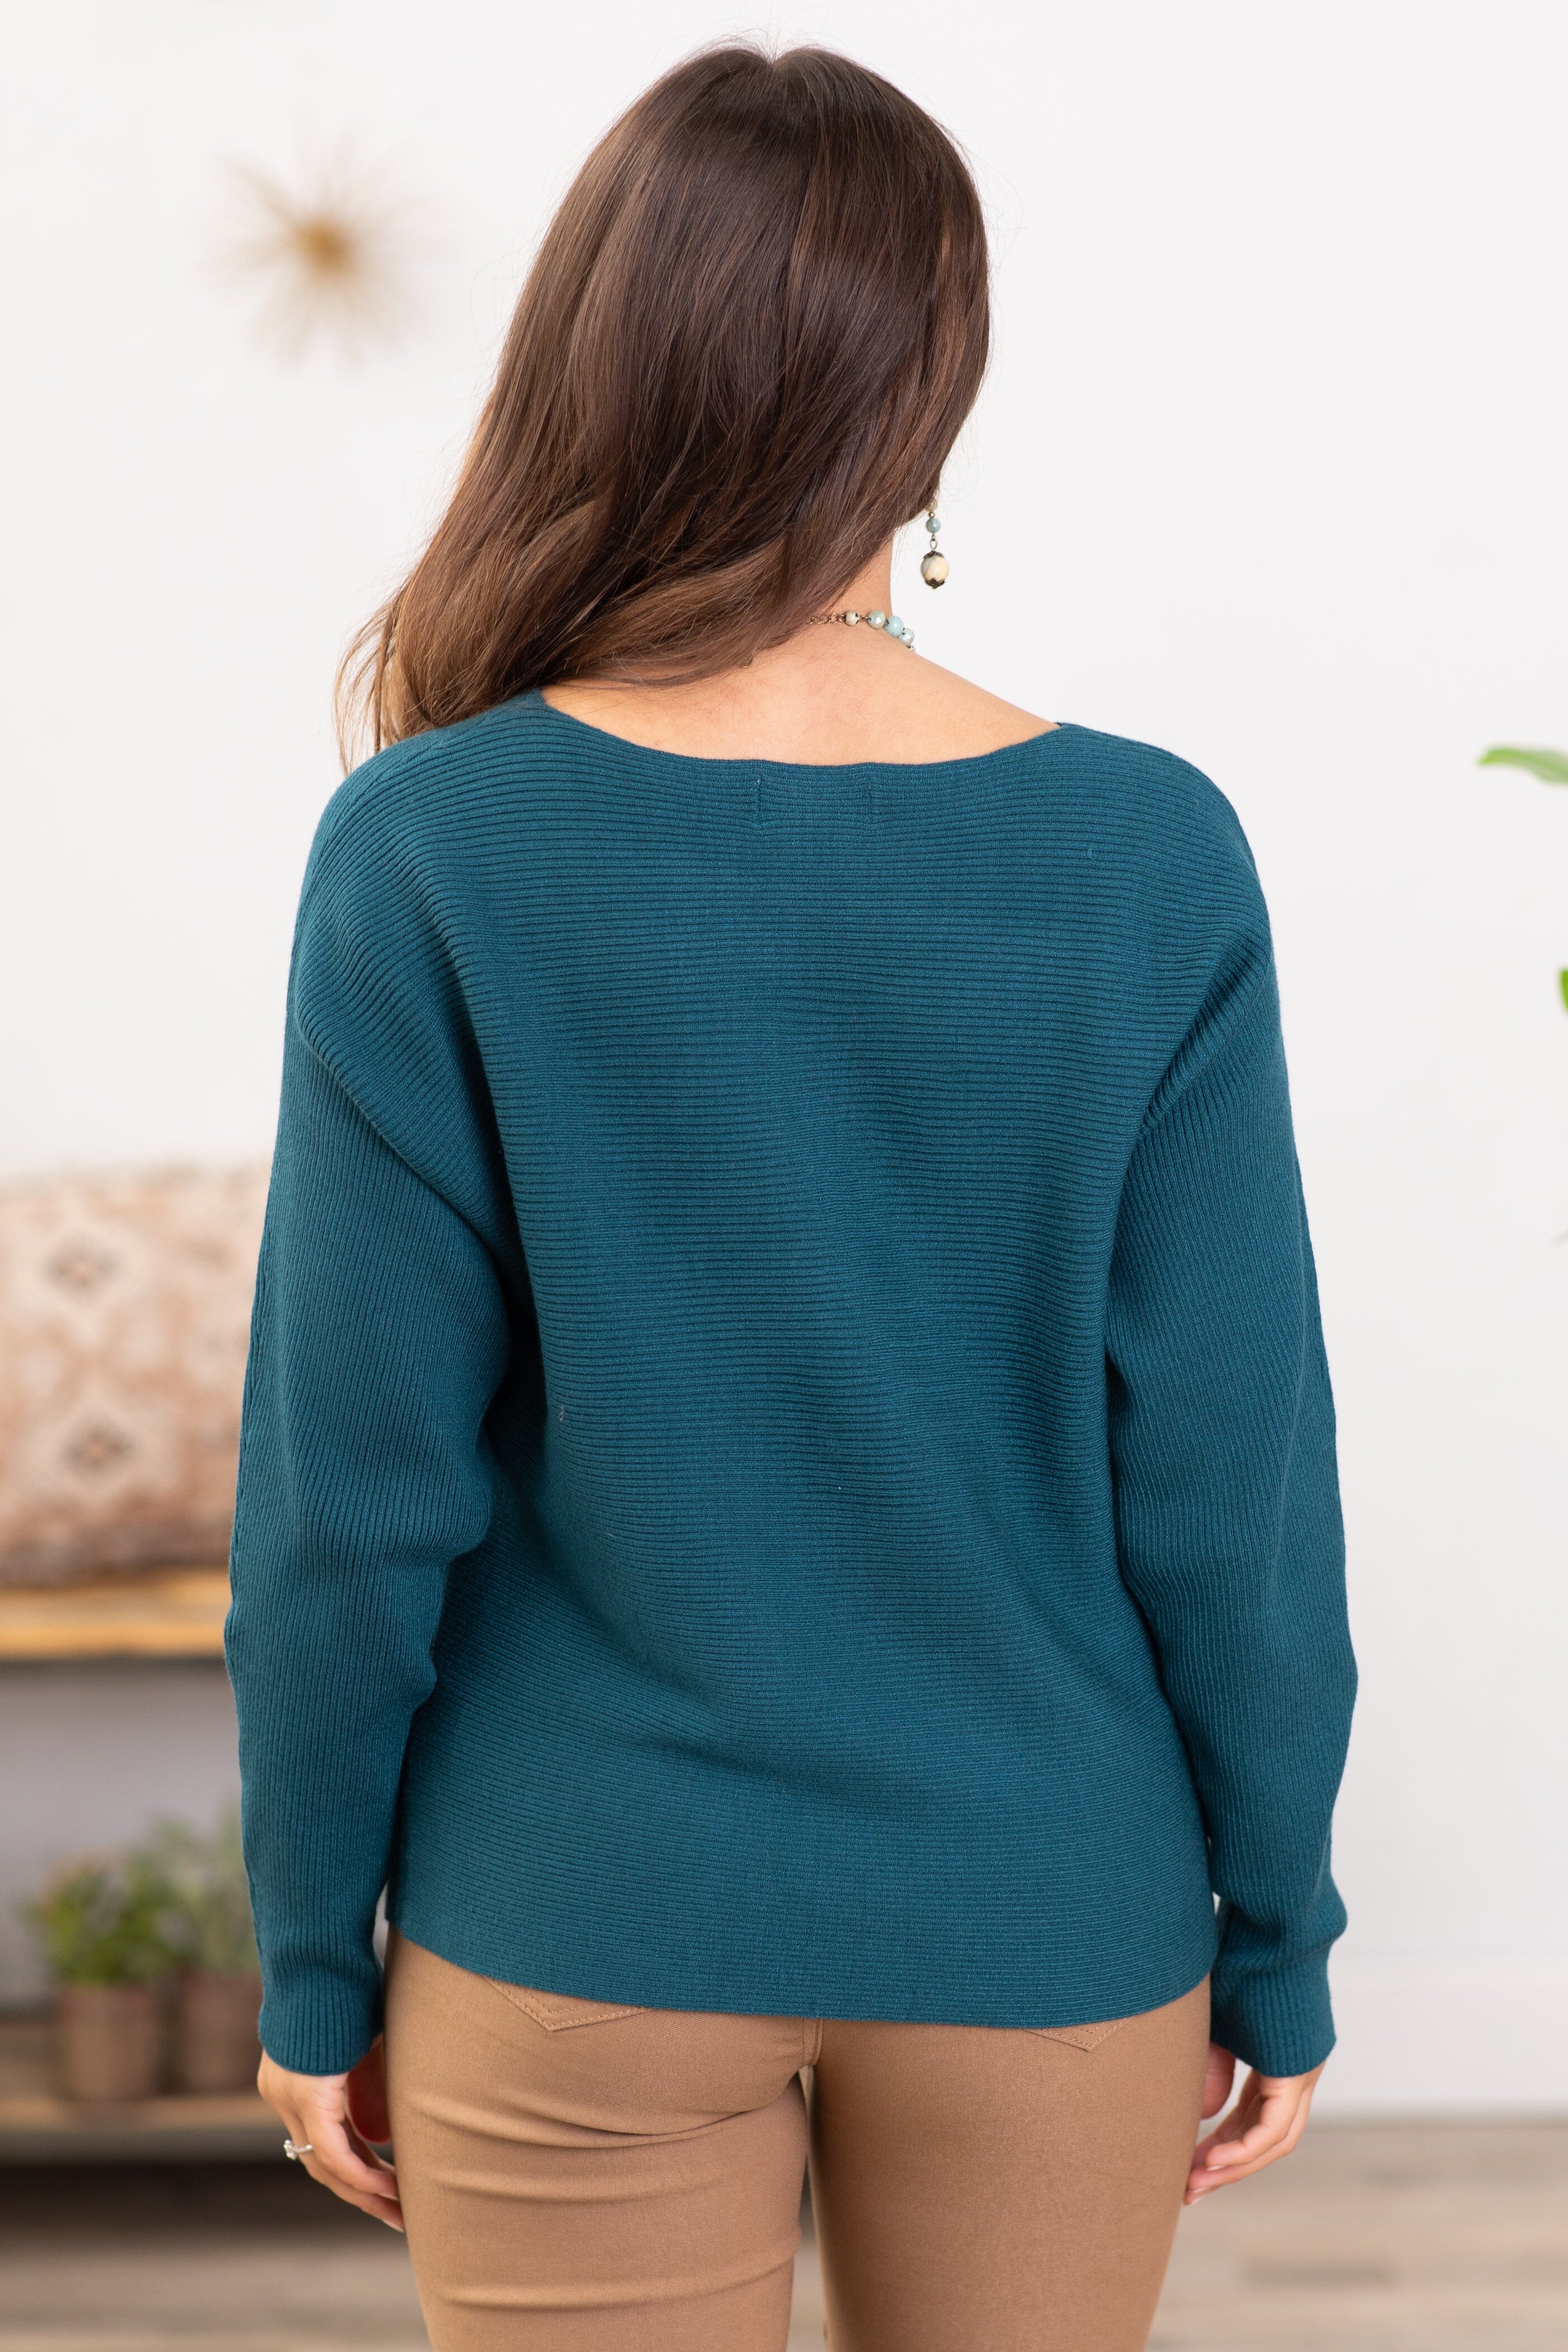 Teal Horizontal Ribbed Sweater - Filly Flair